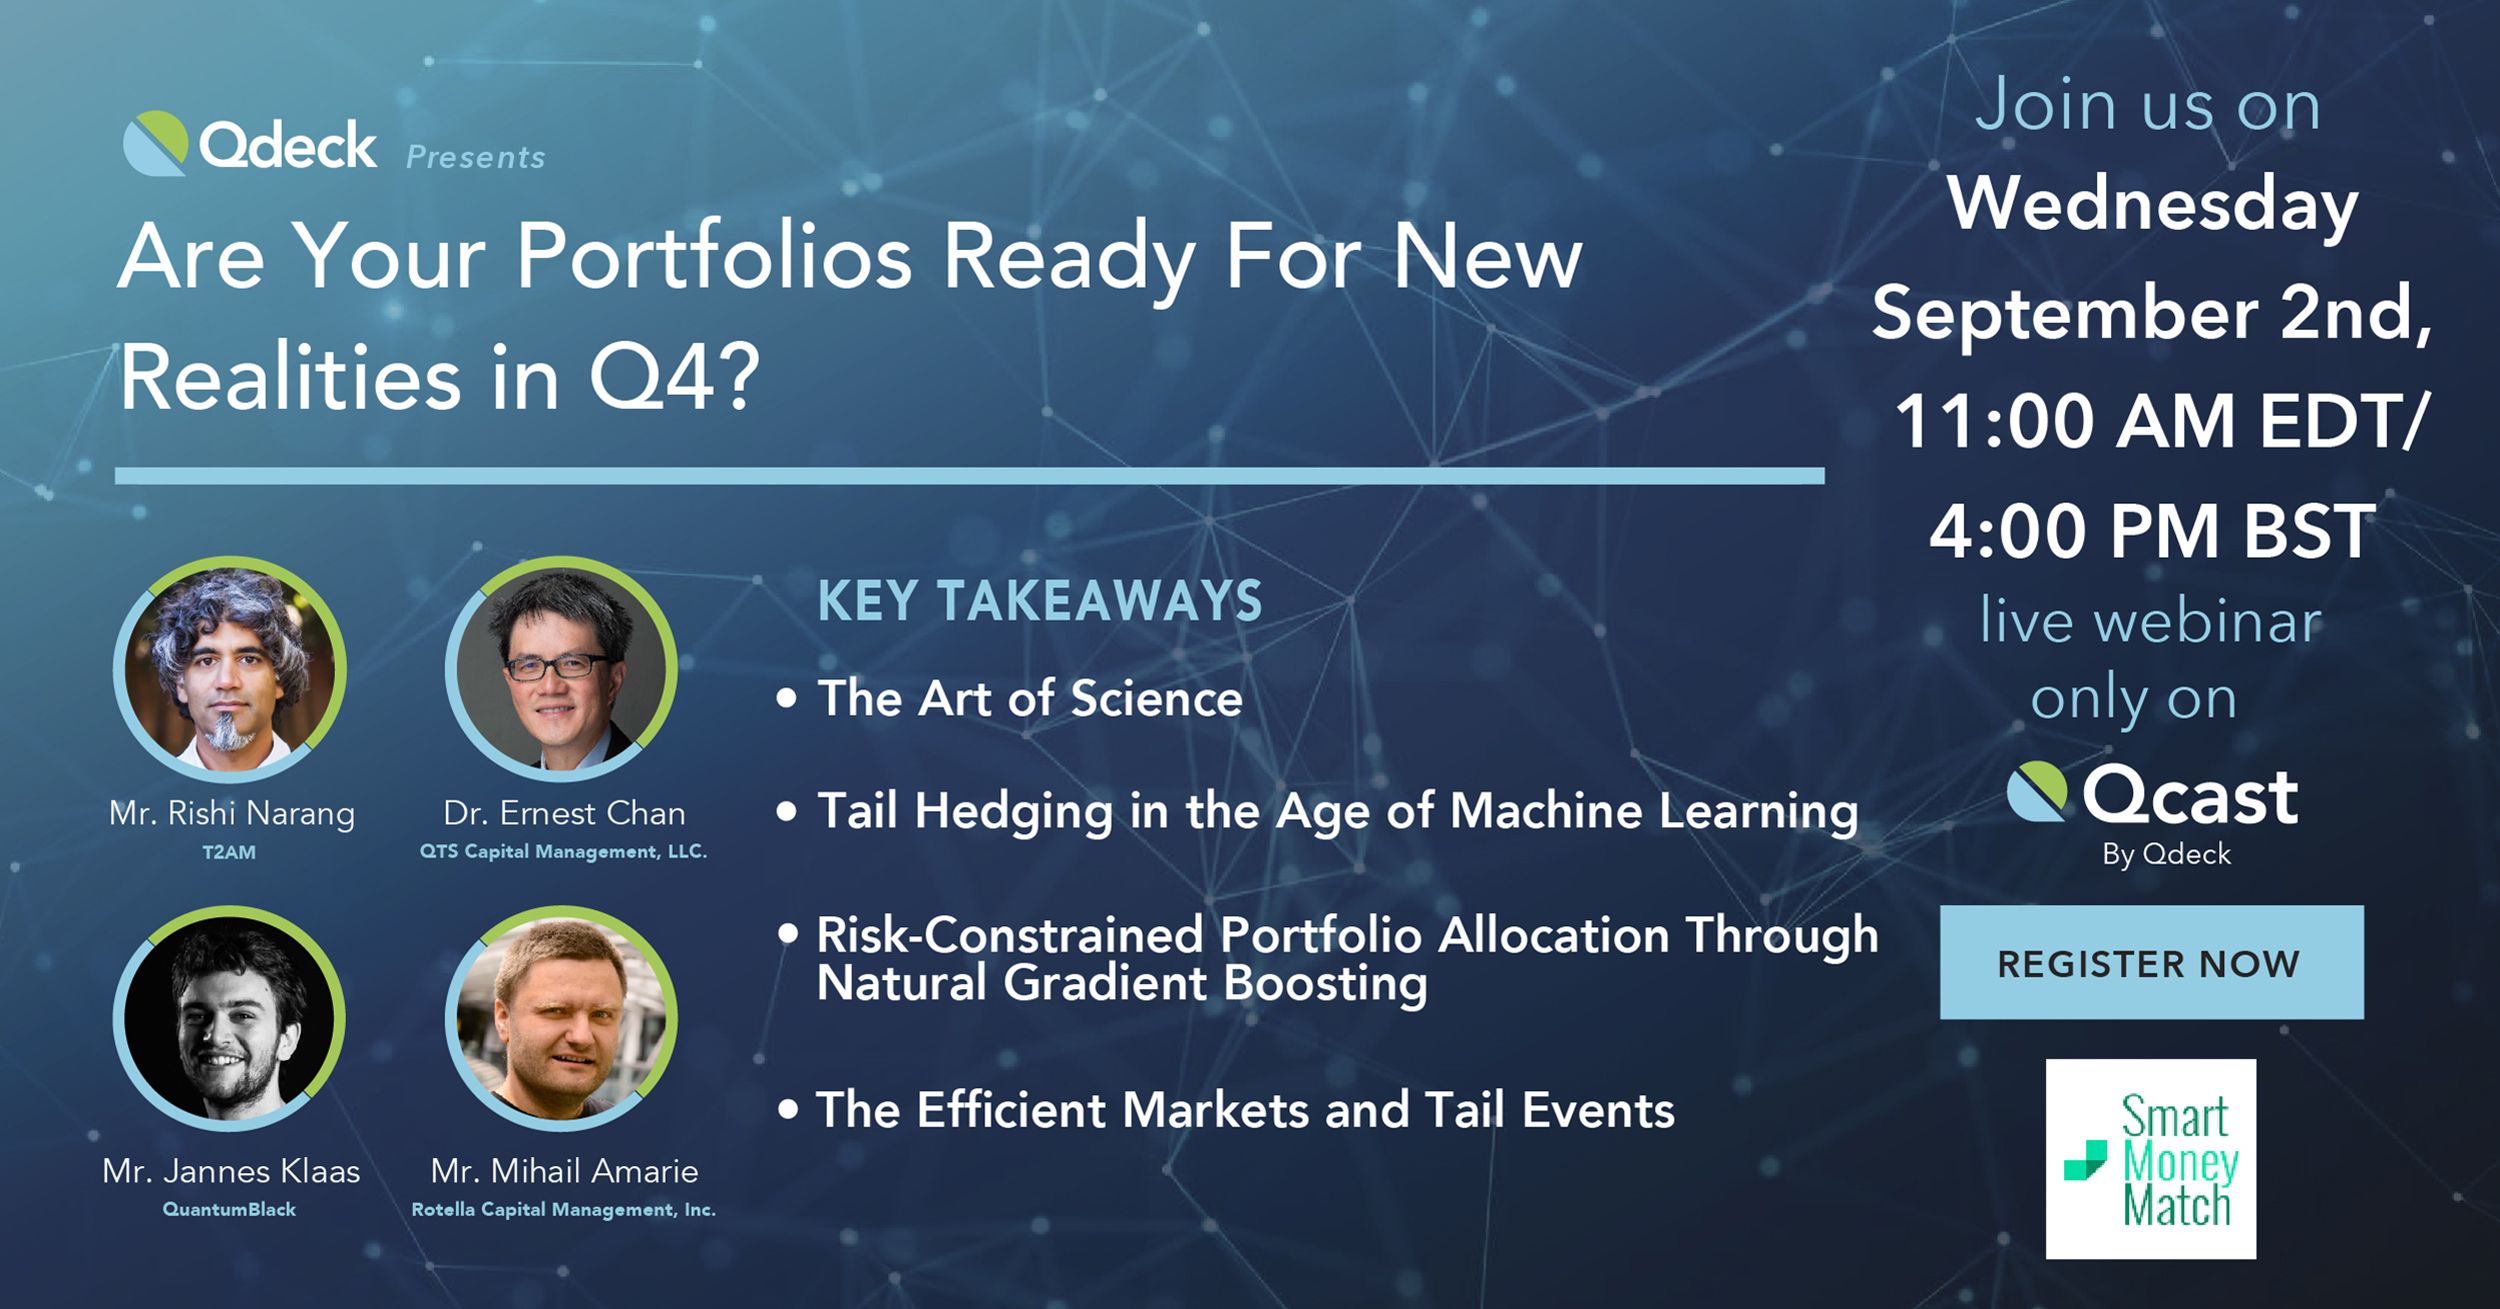 Rotella Qcast Webinar Topic Are Your Portfolios Ready for the New Realities in Q4 organized by Rotella Capital Management